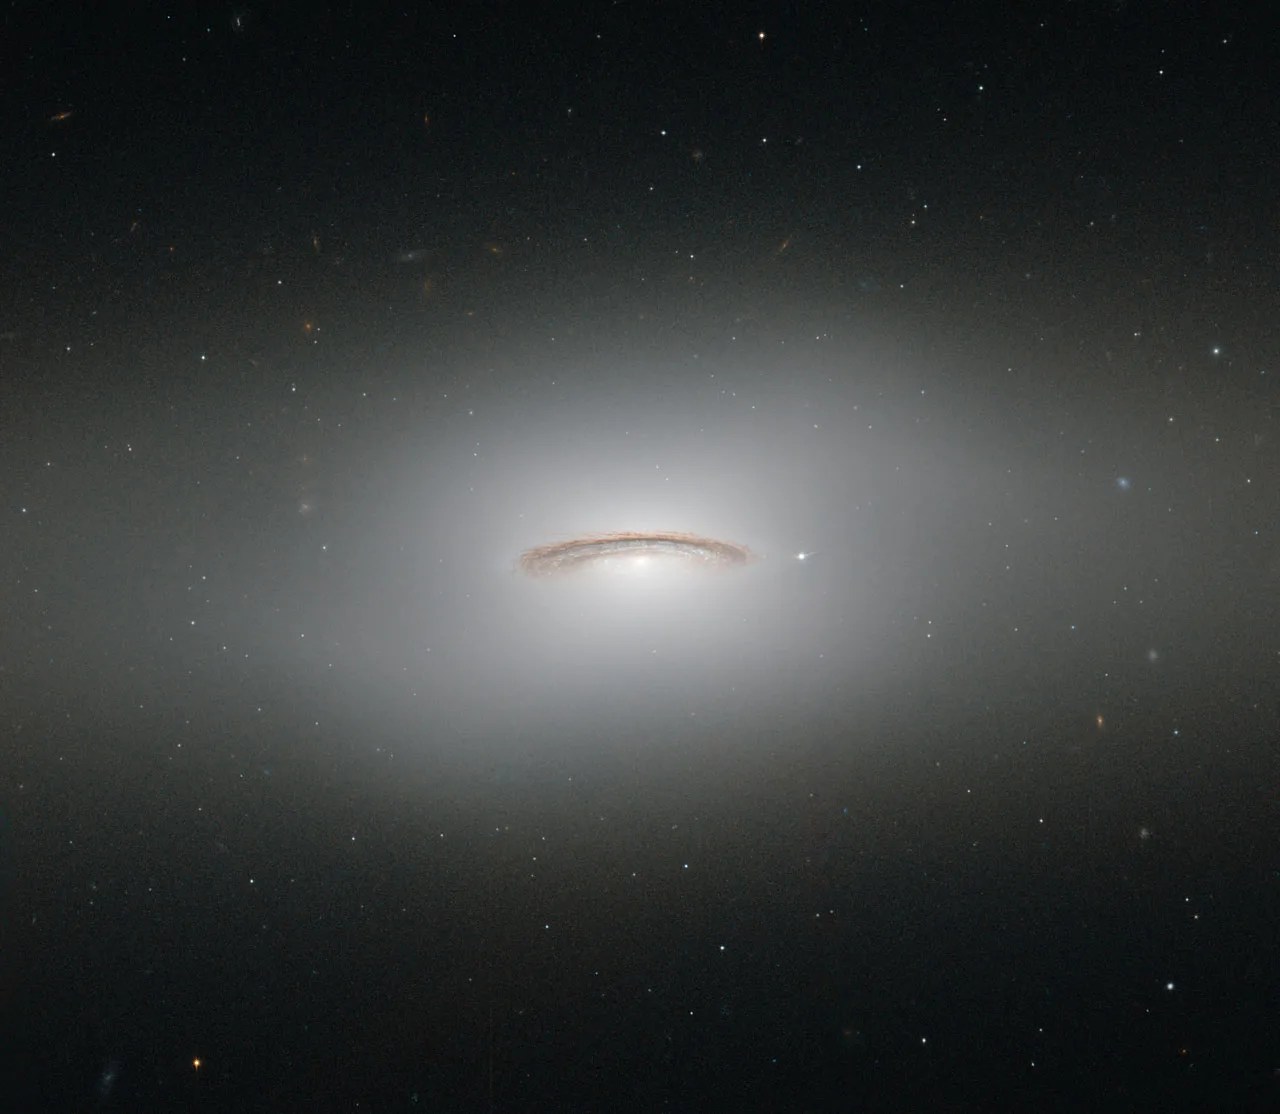 A bright, disk-shaped galaxy with rim-like dark dust lanes and a bright core. It looks a bit like a distant flying saucer.